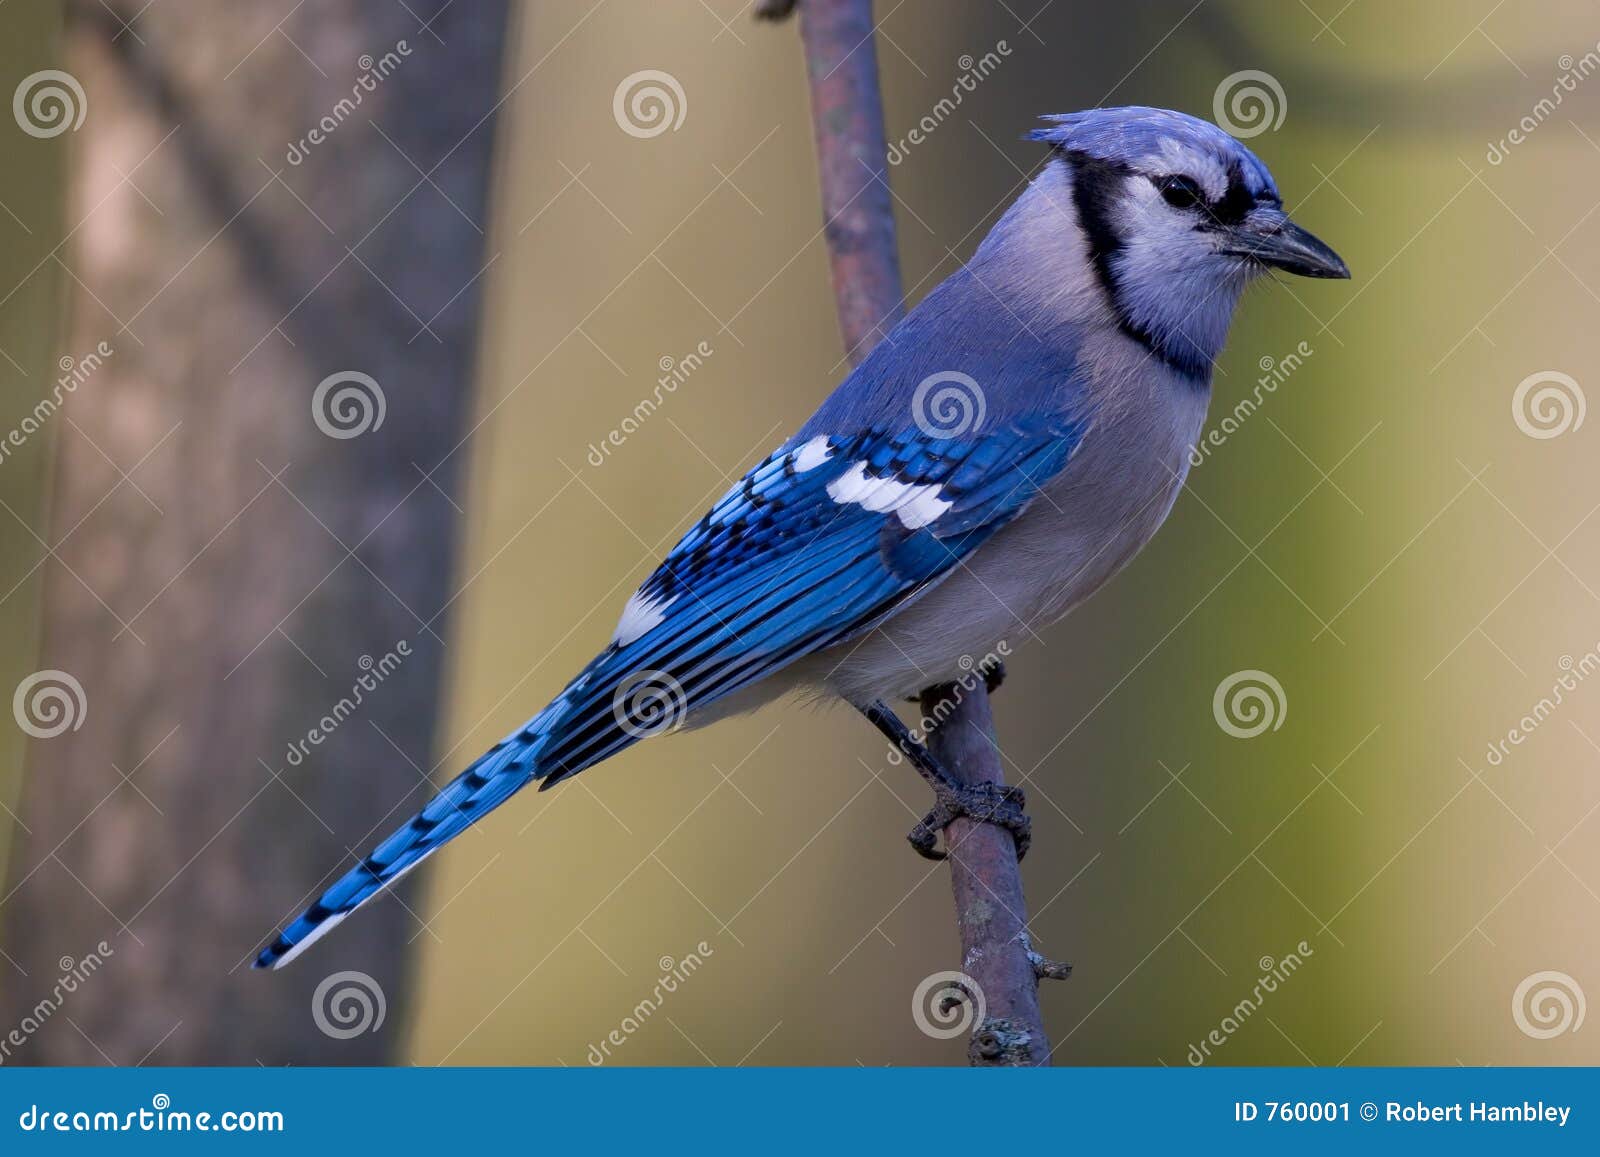 Bluejay Feather Stock Illustrations – 93 Bluejay Feather Stock  Illustrations, Vectors & Clipart - Dreamstime